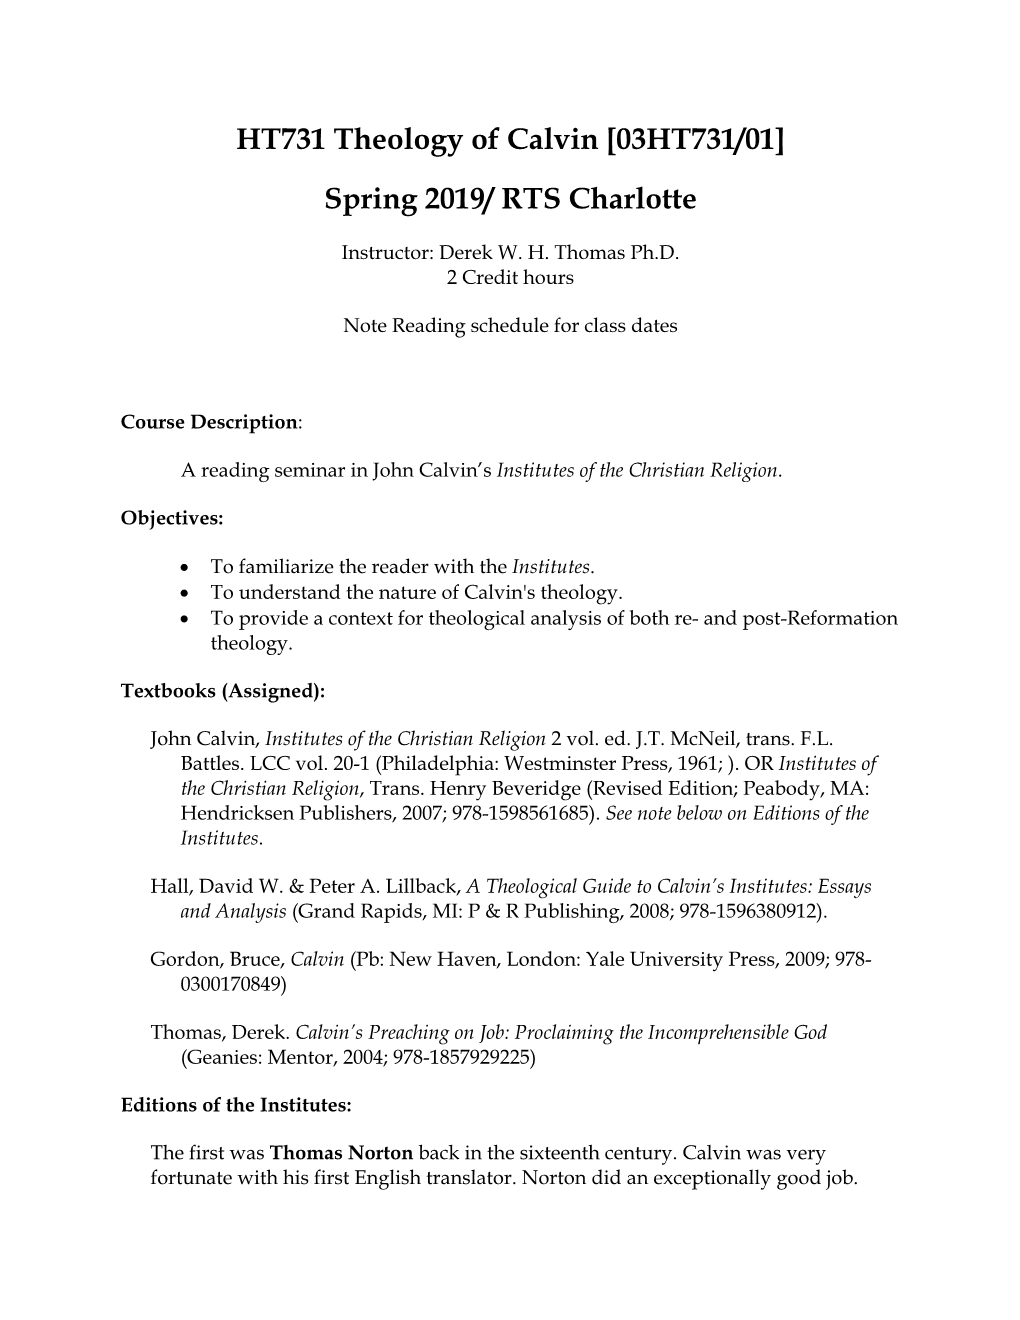 HT731 Theology of Calvin [03HT731/01] Spring 2019/ RTS Charlotte